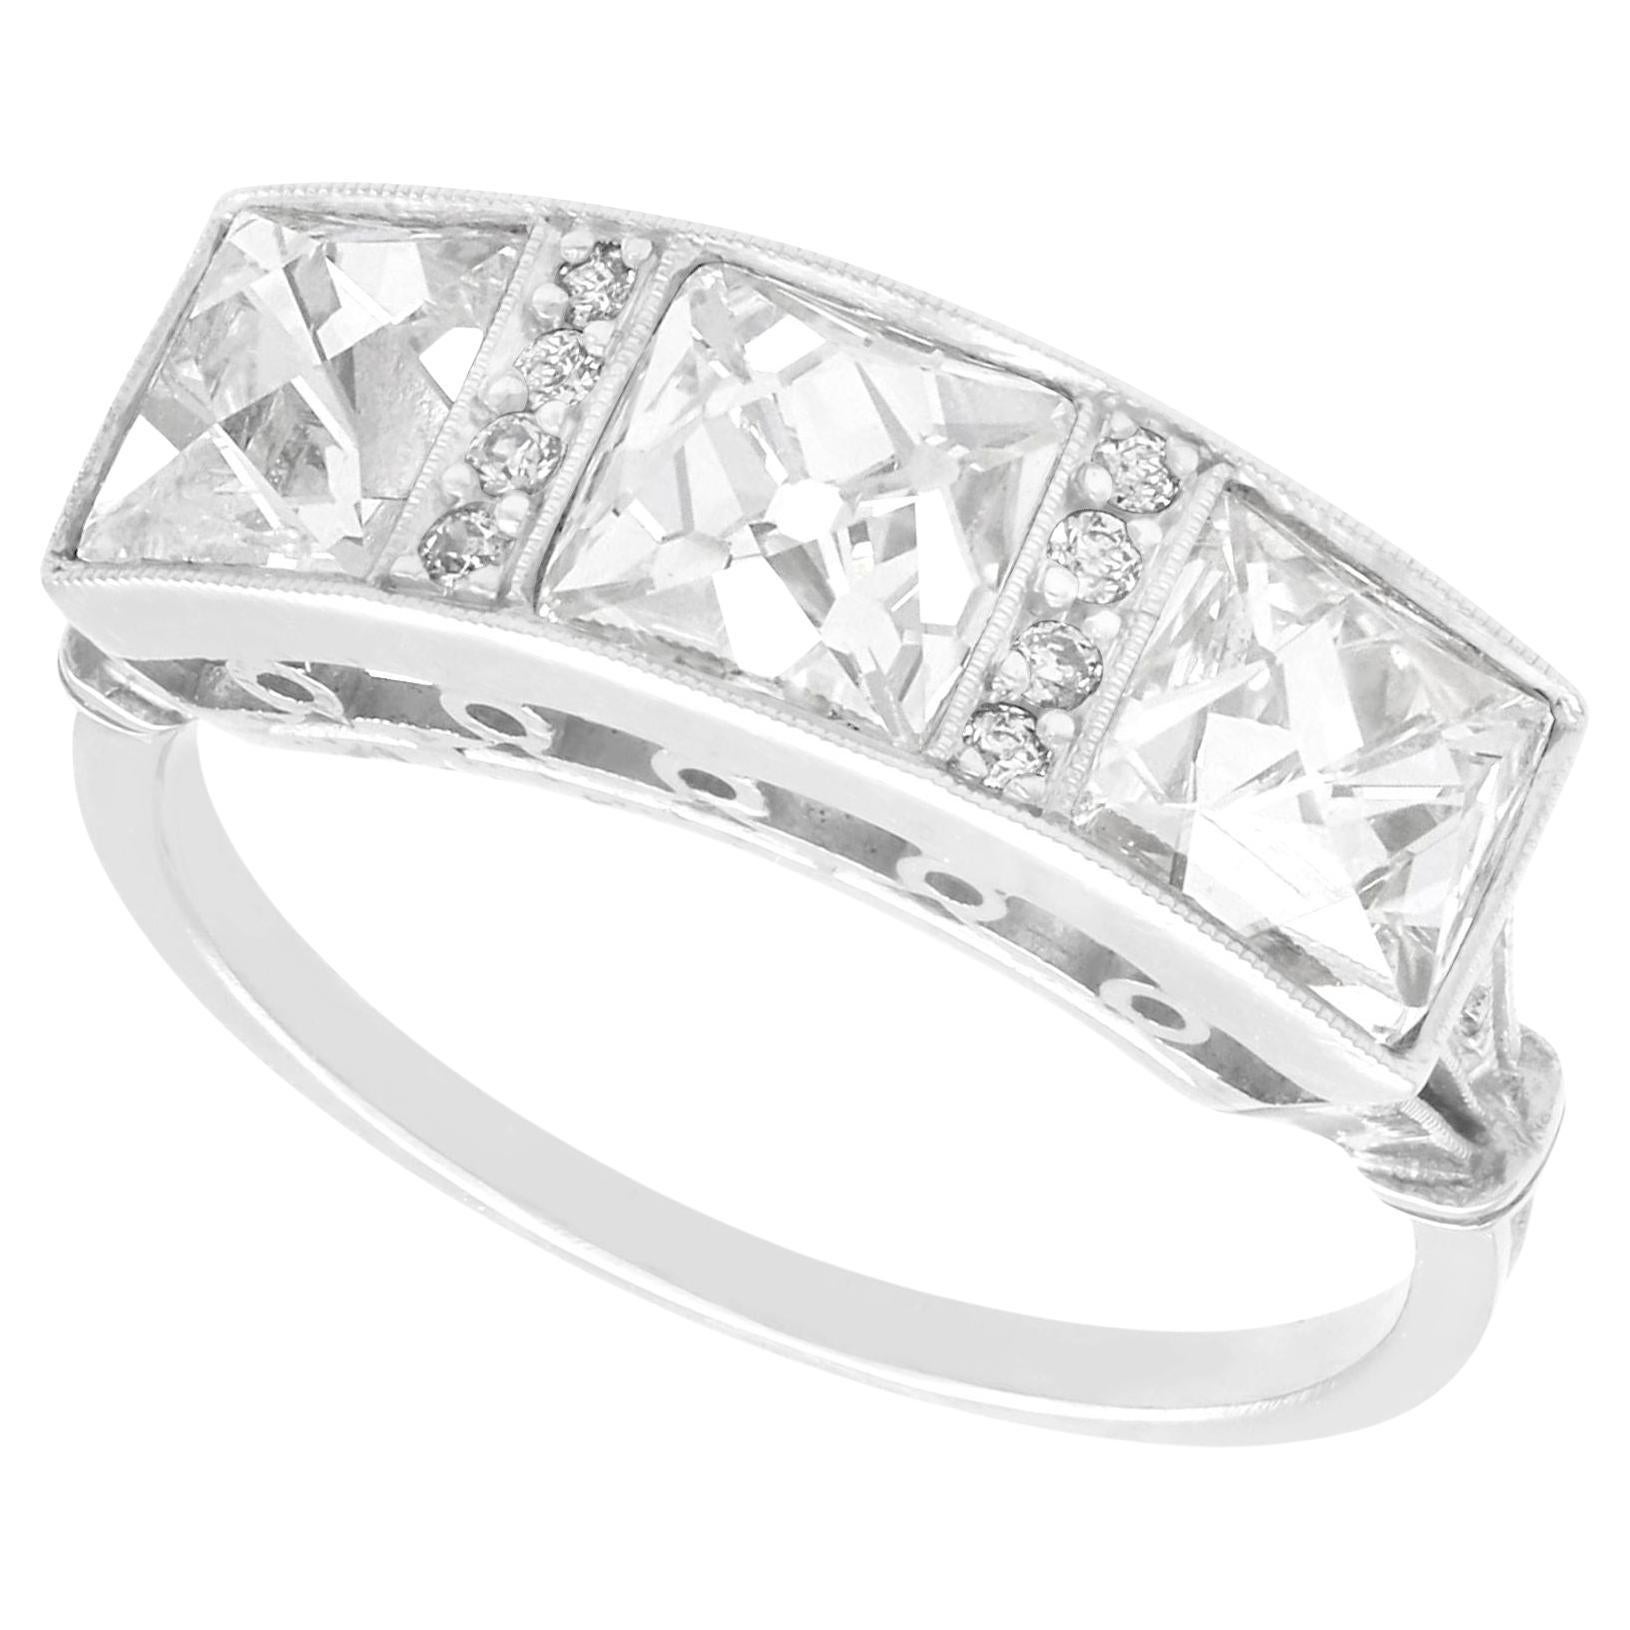 3.27 Carat Diamond and Platinum Trilogy Ring For Sale